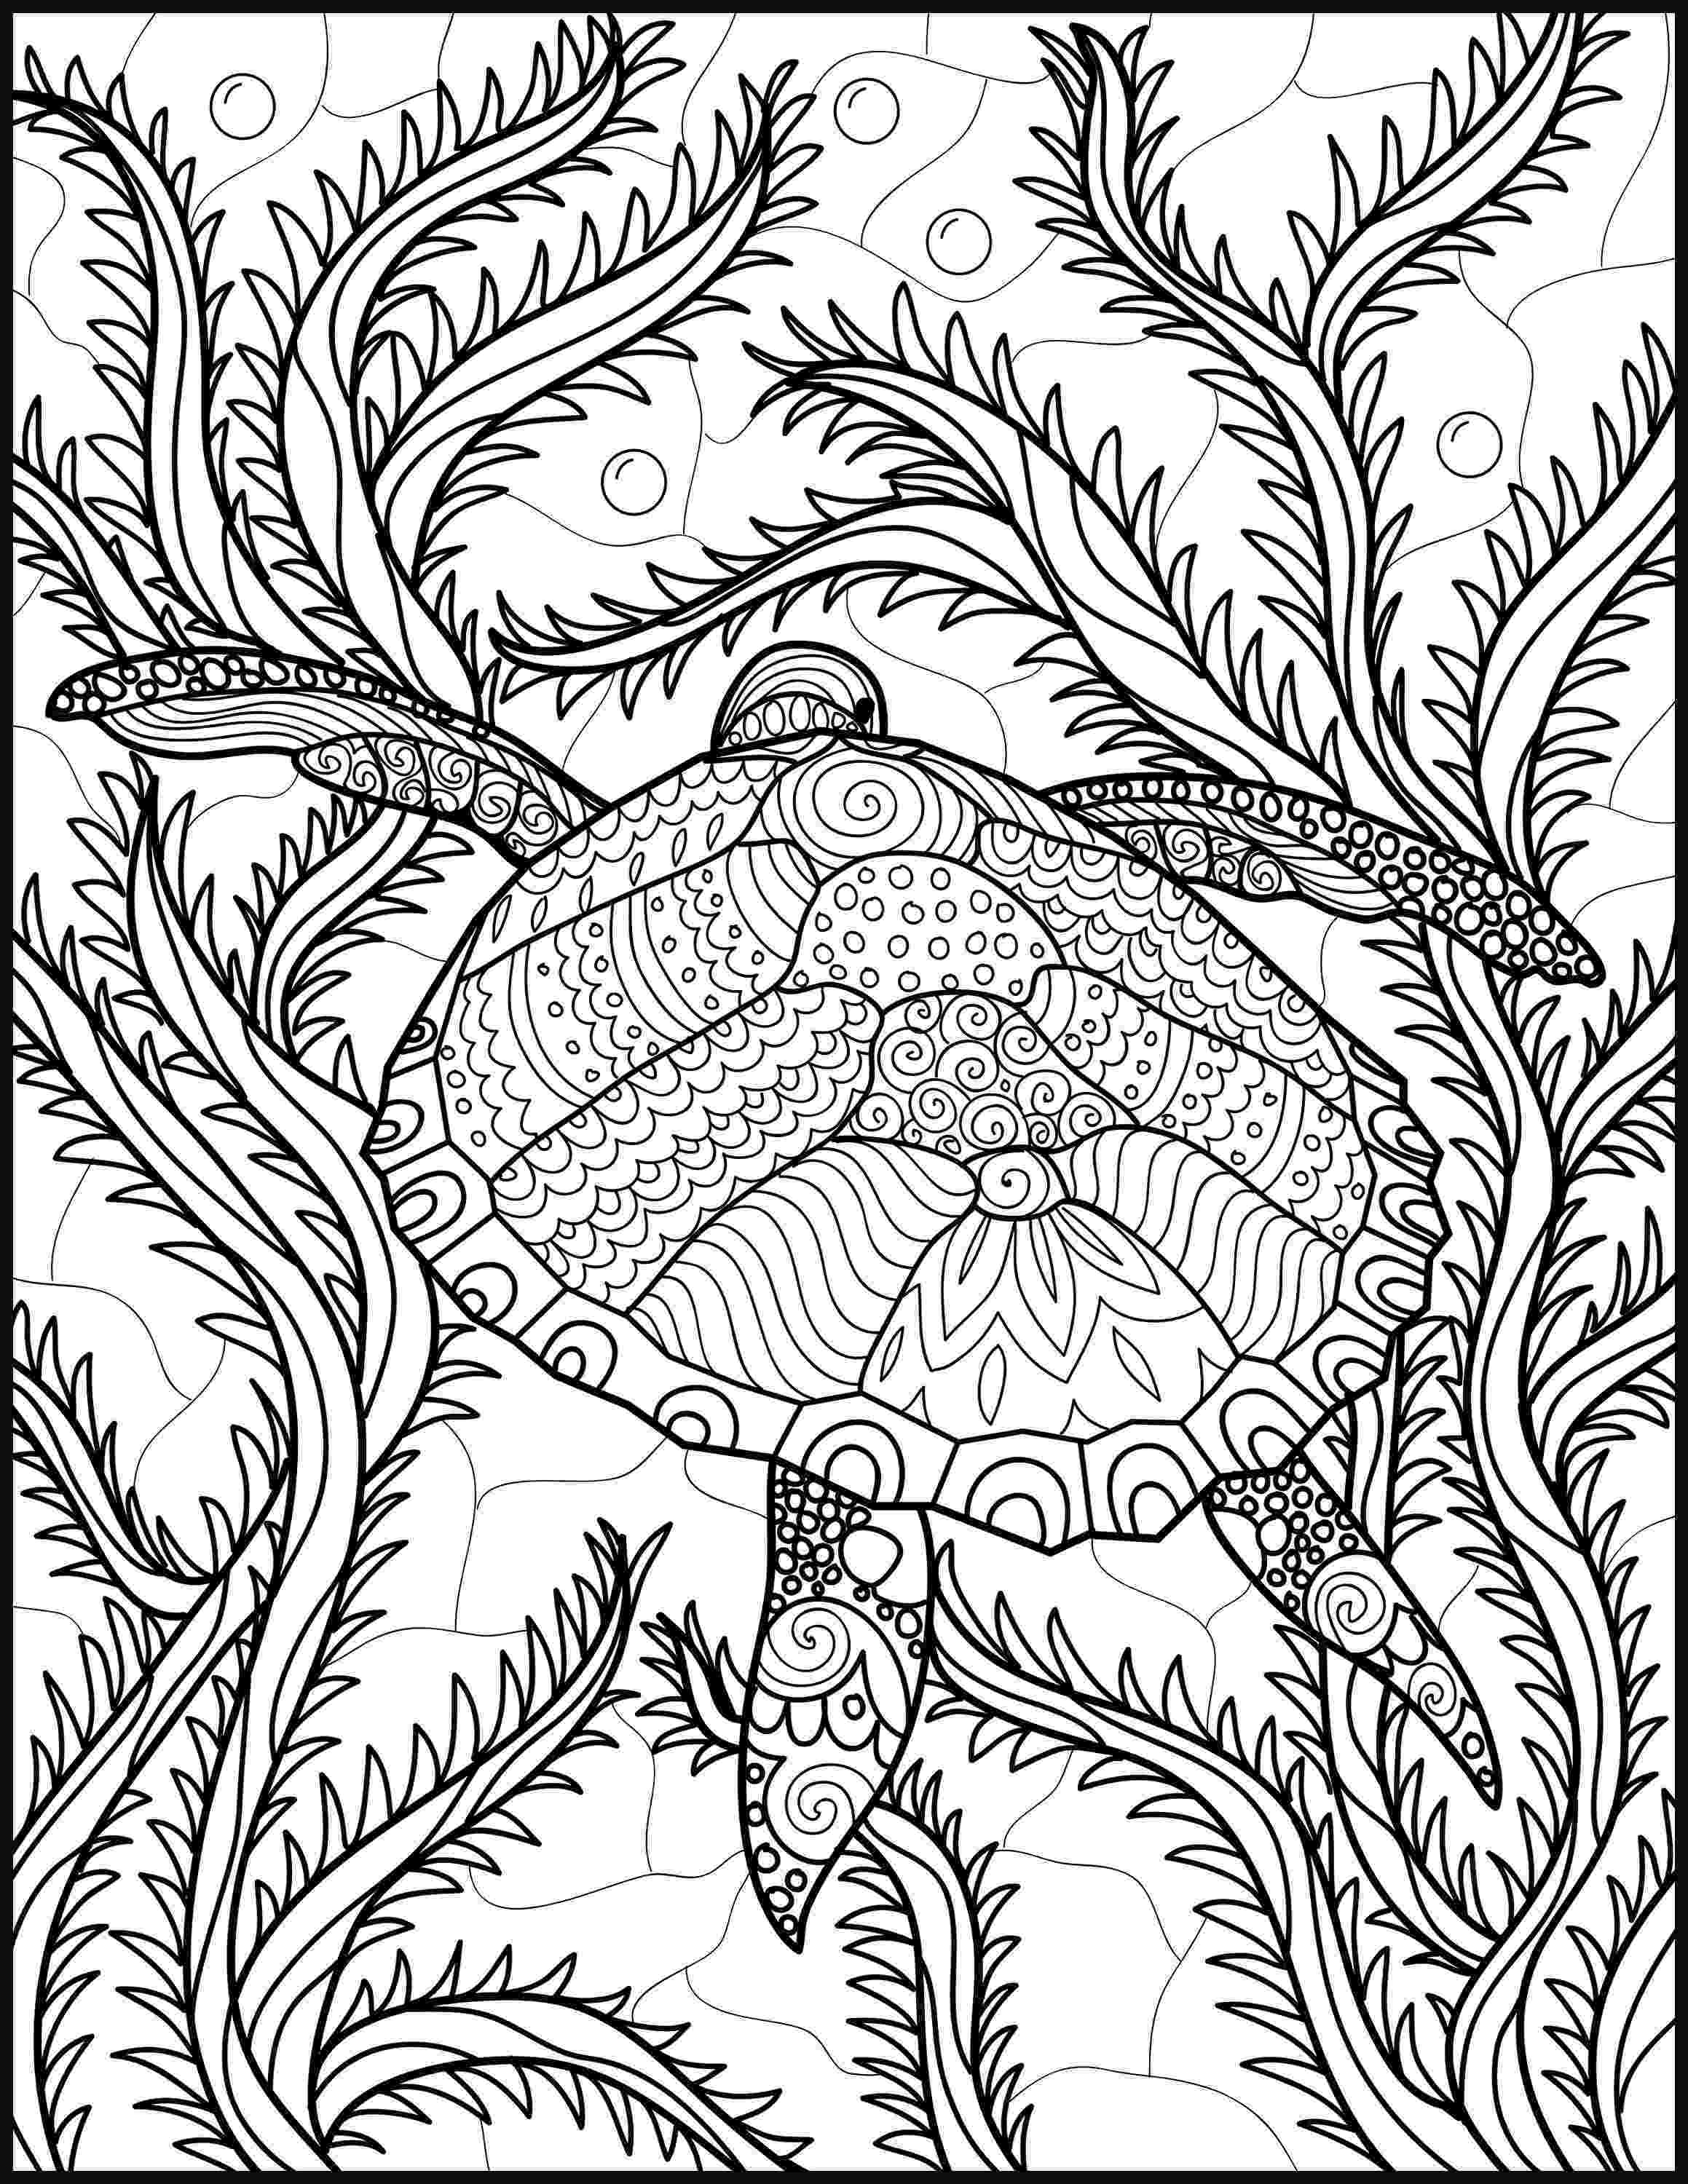 cheetah coloring pages for adults free jaguar coloring pages adults for pages coloring cheetah 